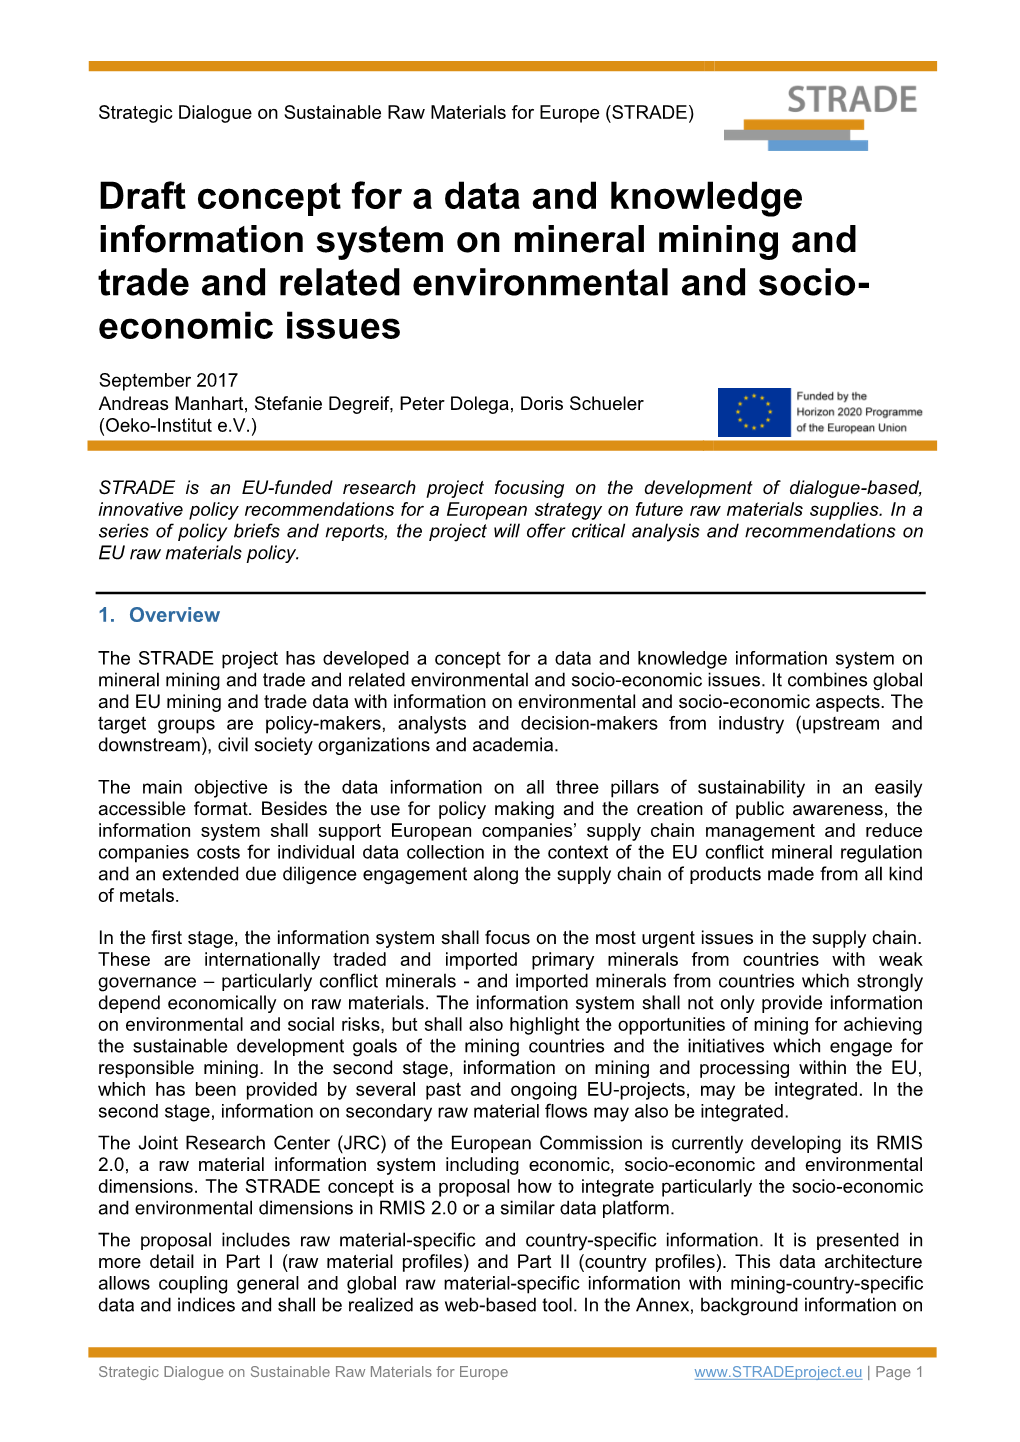 Draft Concept for a Data and Knowledge Information System on Mineral Mining and Trade and Related Environmental and Socio- Economic Issues